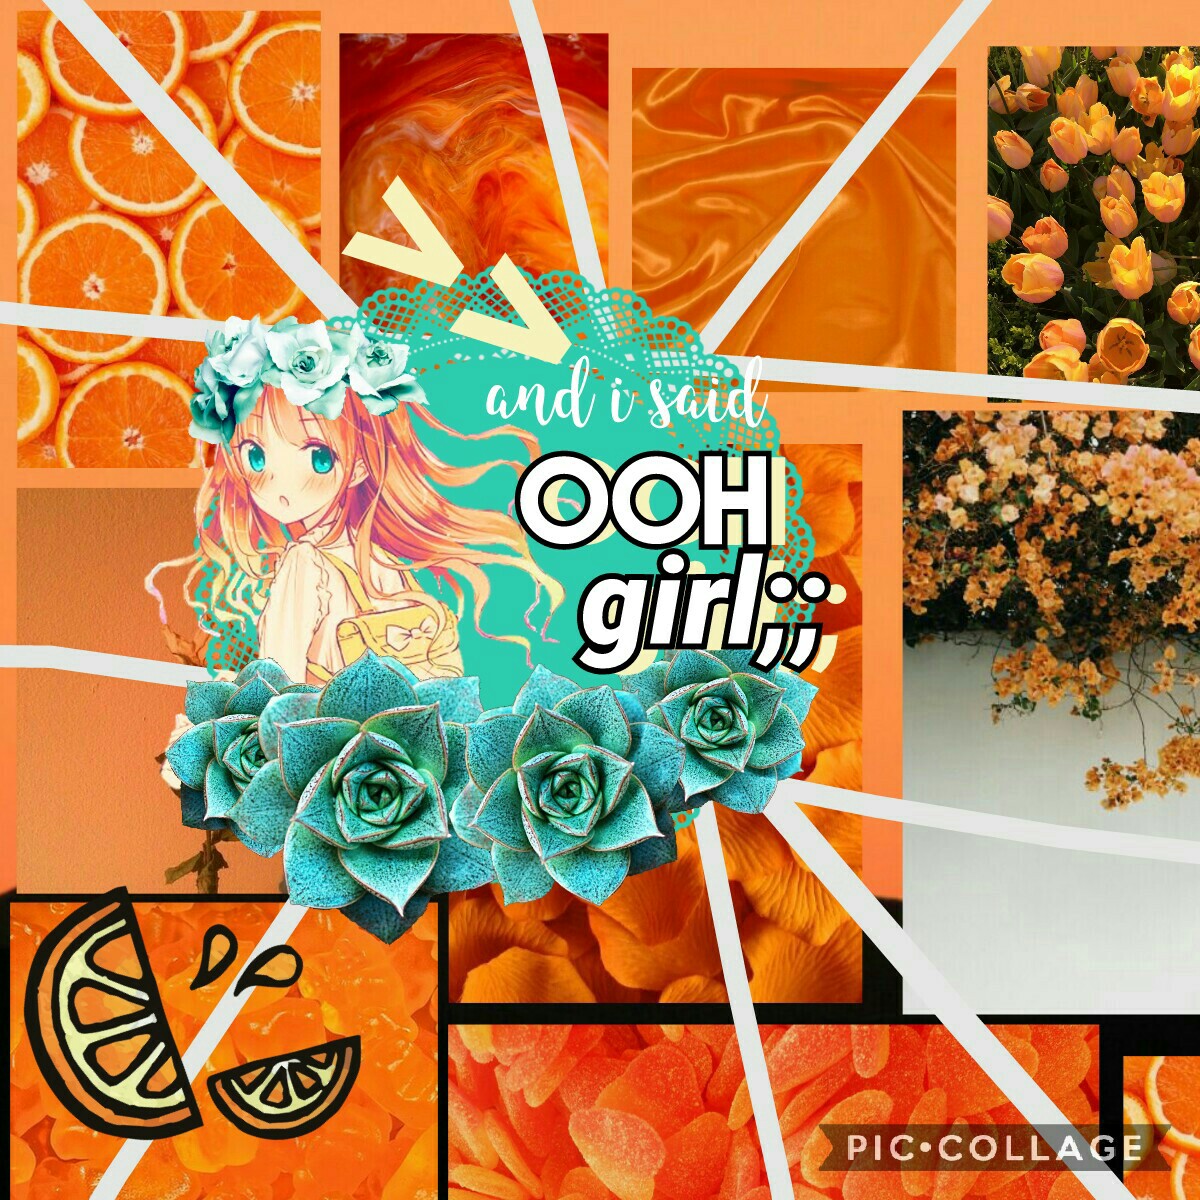 🍁 tap for more 🍁
this is my kind-of orange collage in my set of rainbow collages, and i kinda like it because it's different than usual??? also, the song that has the lyrics is slightly inappropriate (still catchy tho)